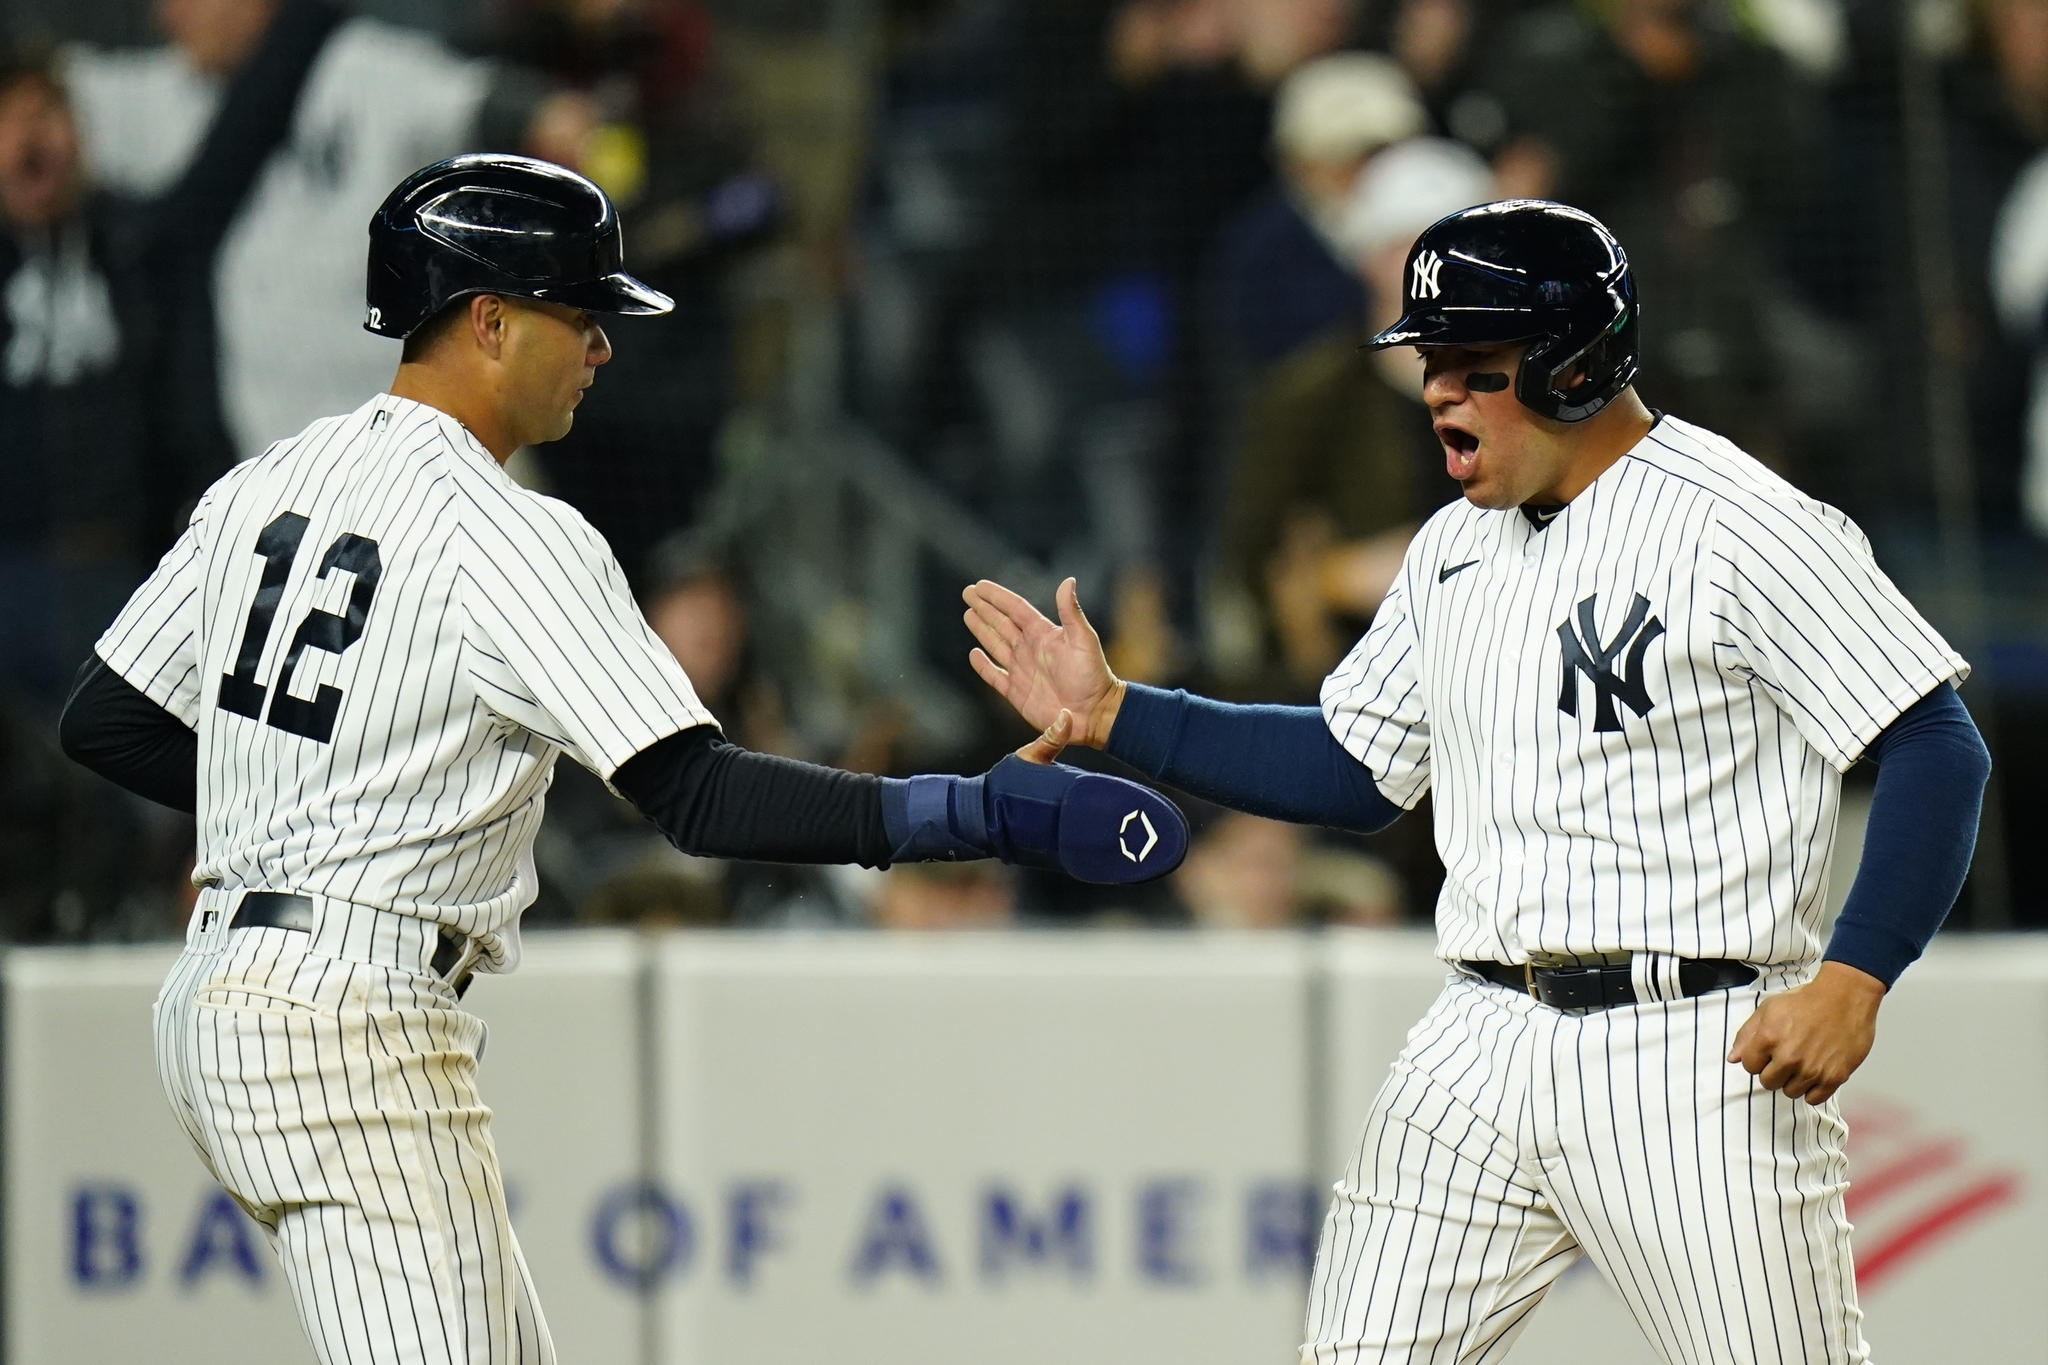 New York  lt;HIT gt;Yankees lt;/HIT gt;' Jose Trevino, right, and Isiah Kiner-Falefa, left, celebrate after they score on a single by Anthony Rizzo during the fourth inning of a baseball game against the Boston Red Sox Sunday, April 10, 2022, in New York. (AP Photo/Frank Franklin II)